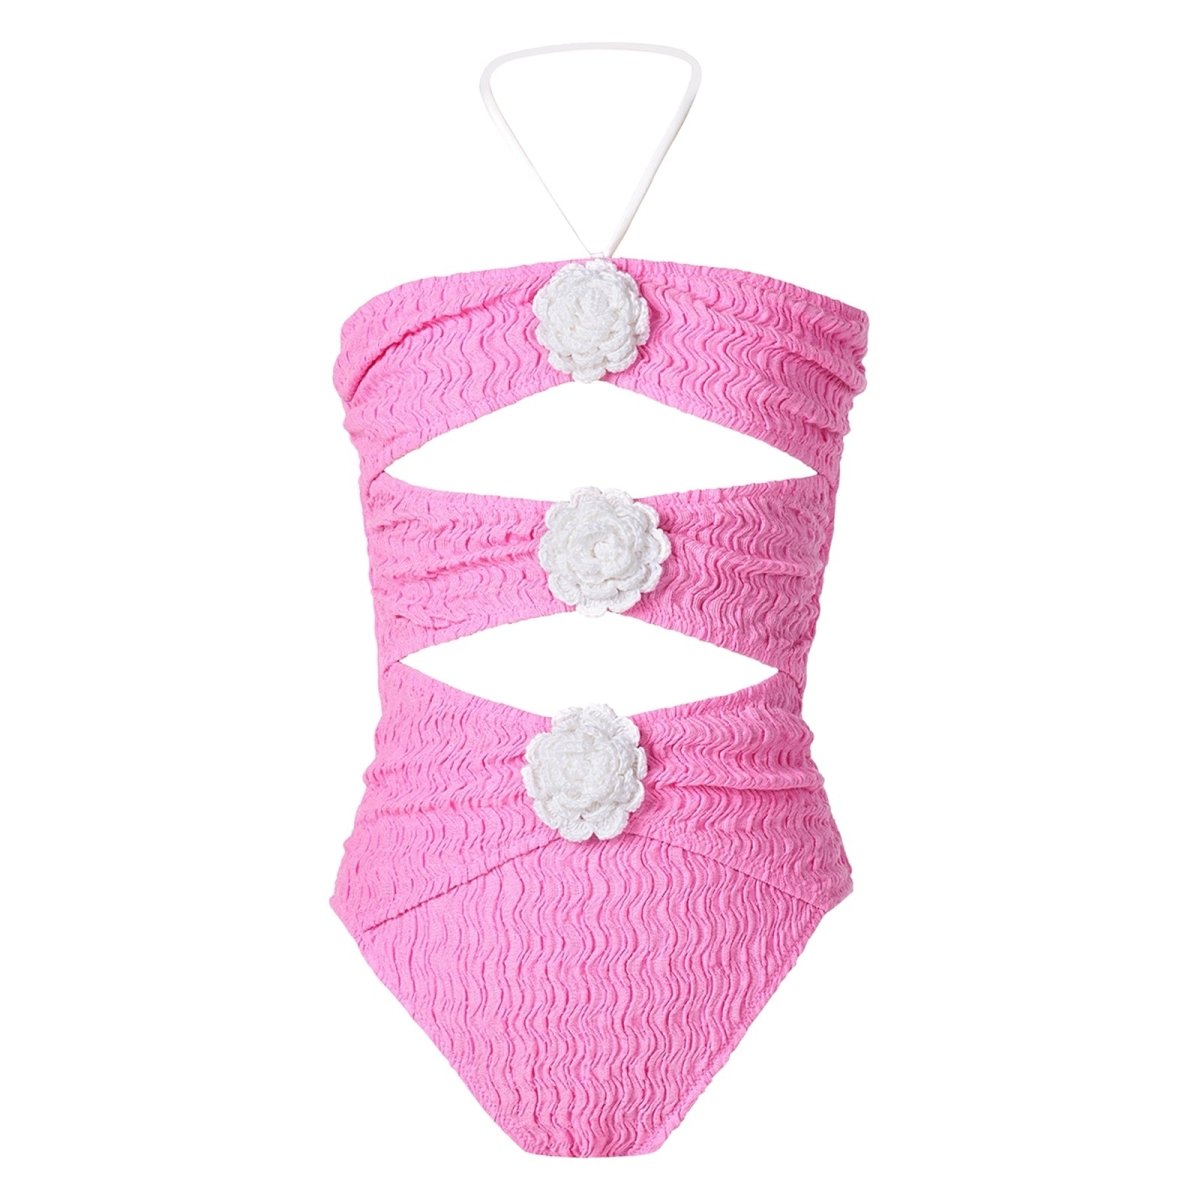 HOBB FLOWERS CRINKLE ONE PIECE SWIMSUIT (PREORDER) - NESSI BYRD